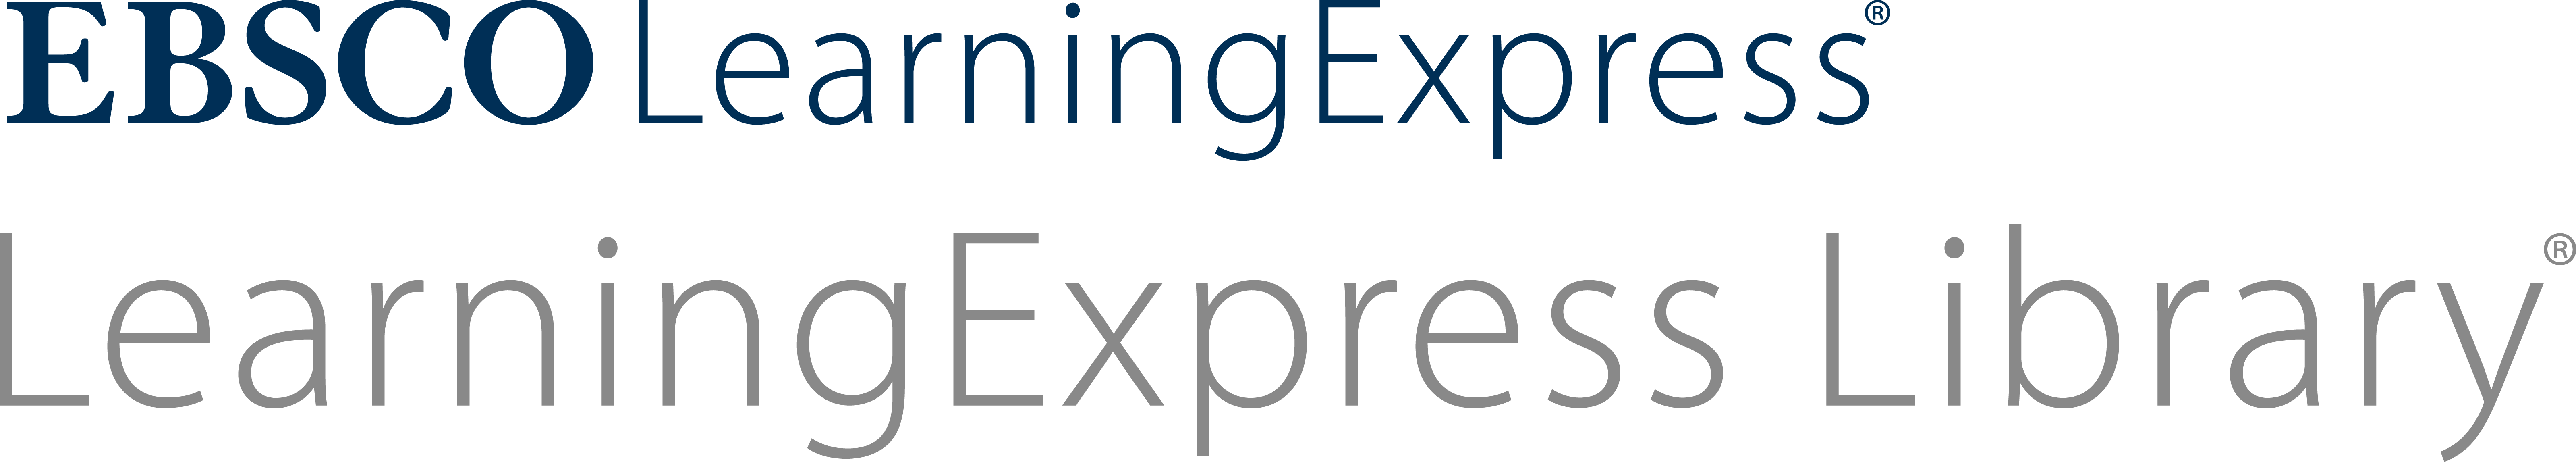 Image for Learning Library Express 3.0 database